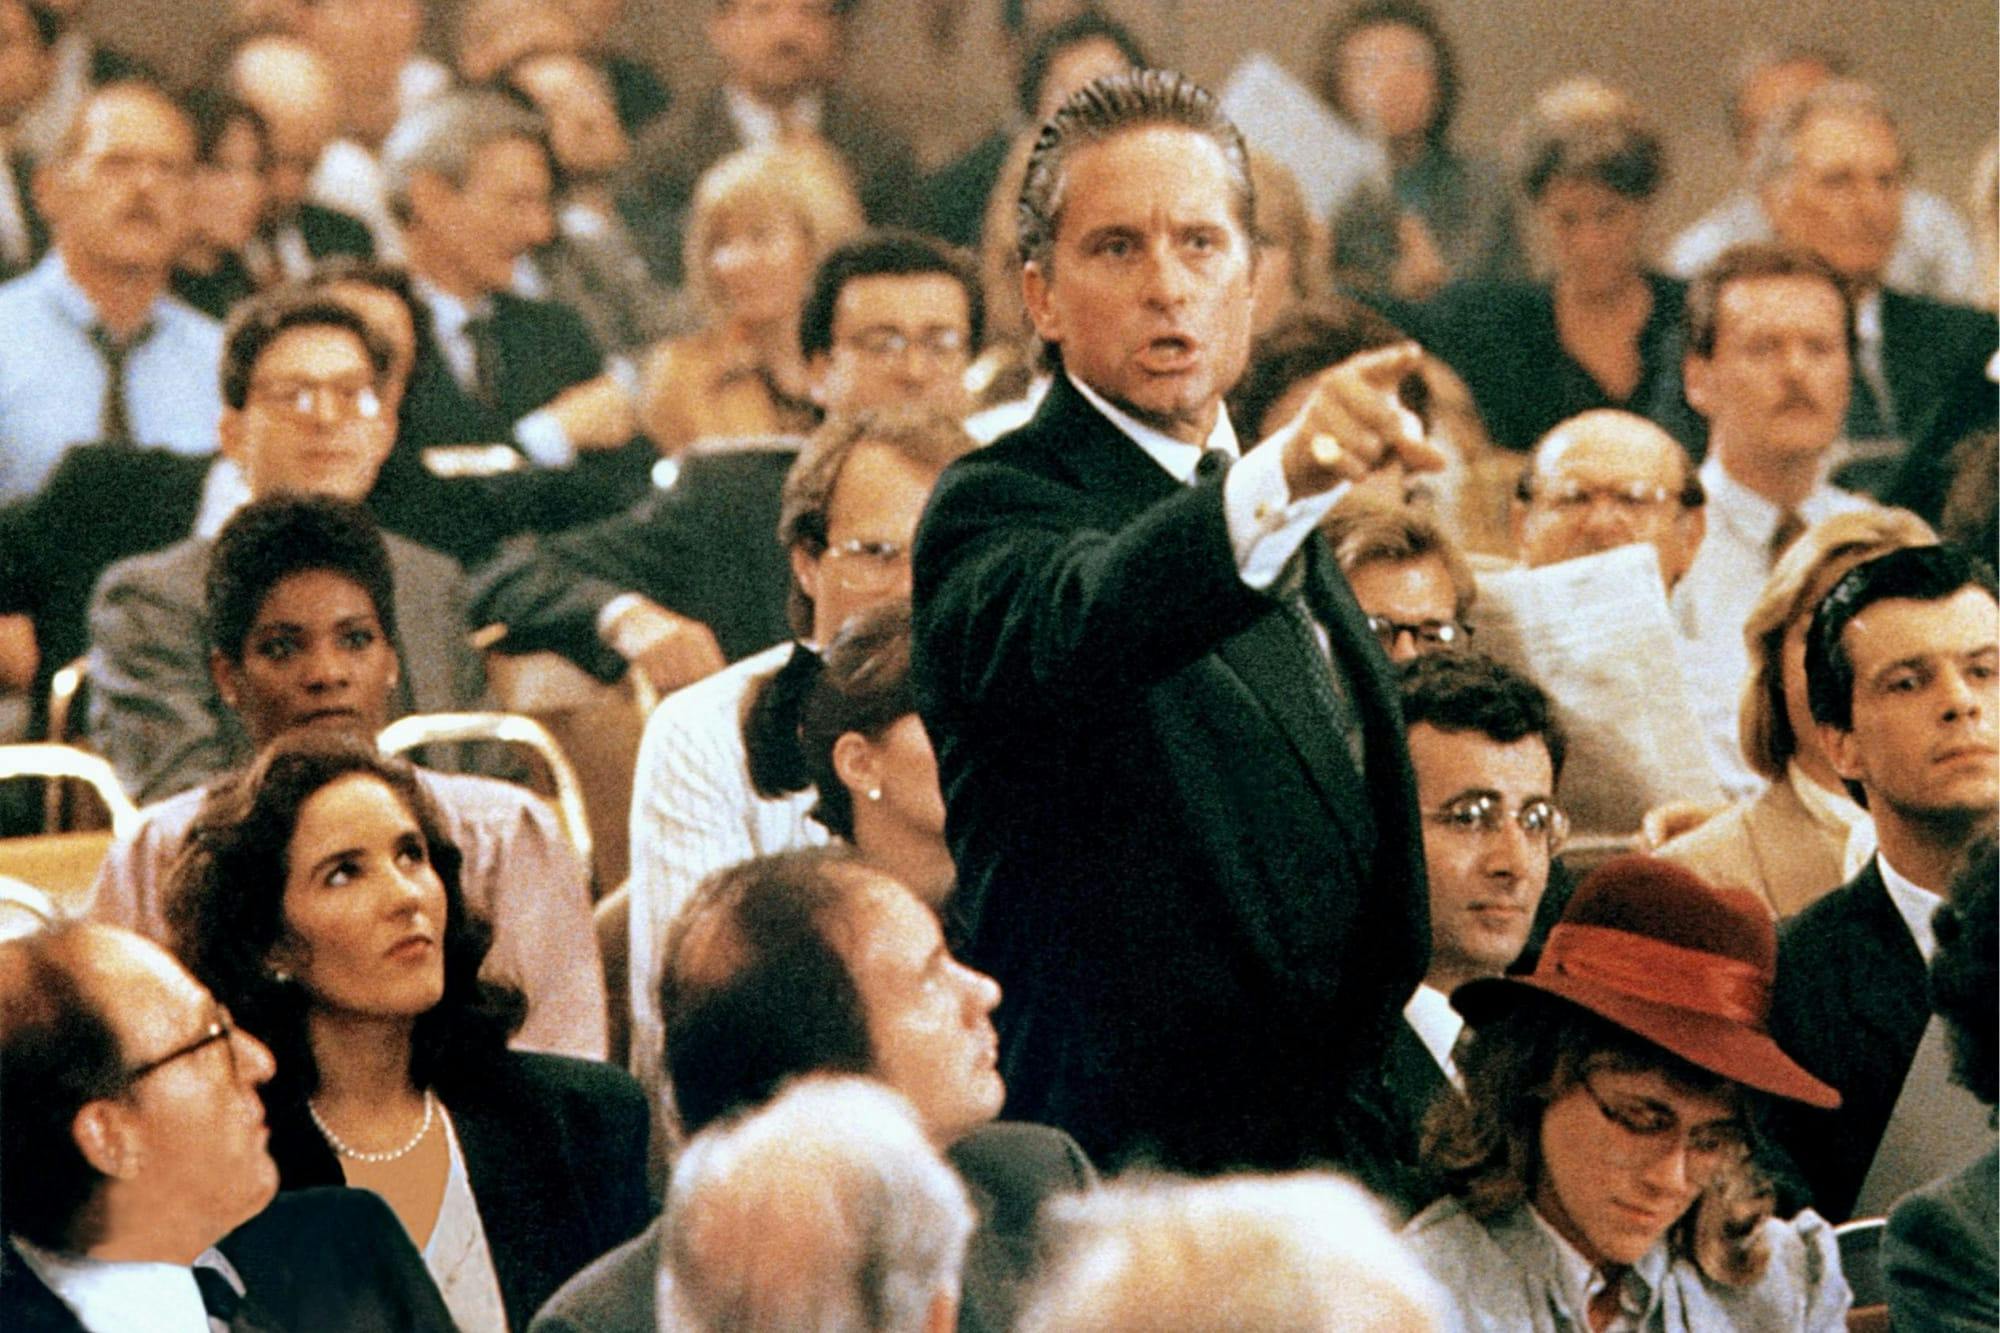 Gordon Gekko (Michael Douglas) in Wall Street stands in a packed courtroom, brandishing his finger at someone.